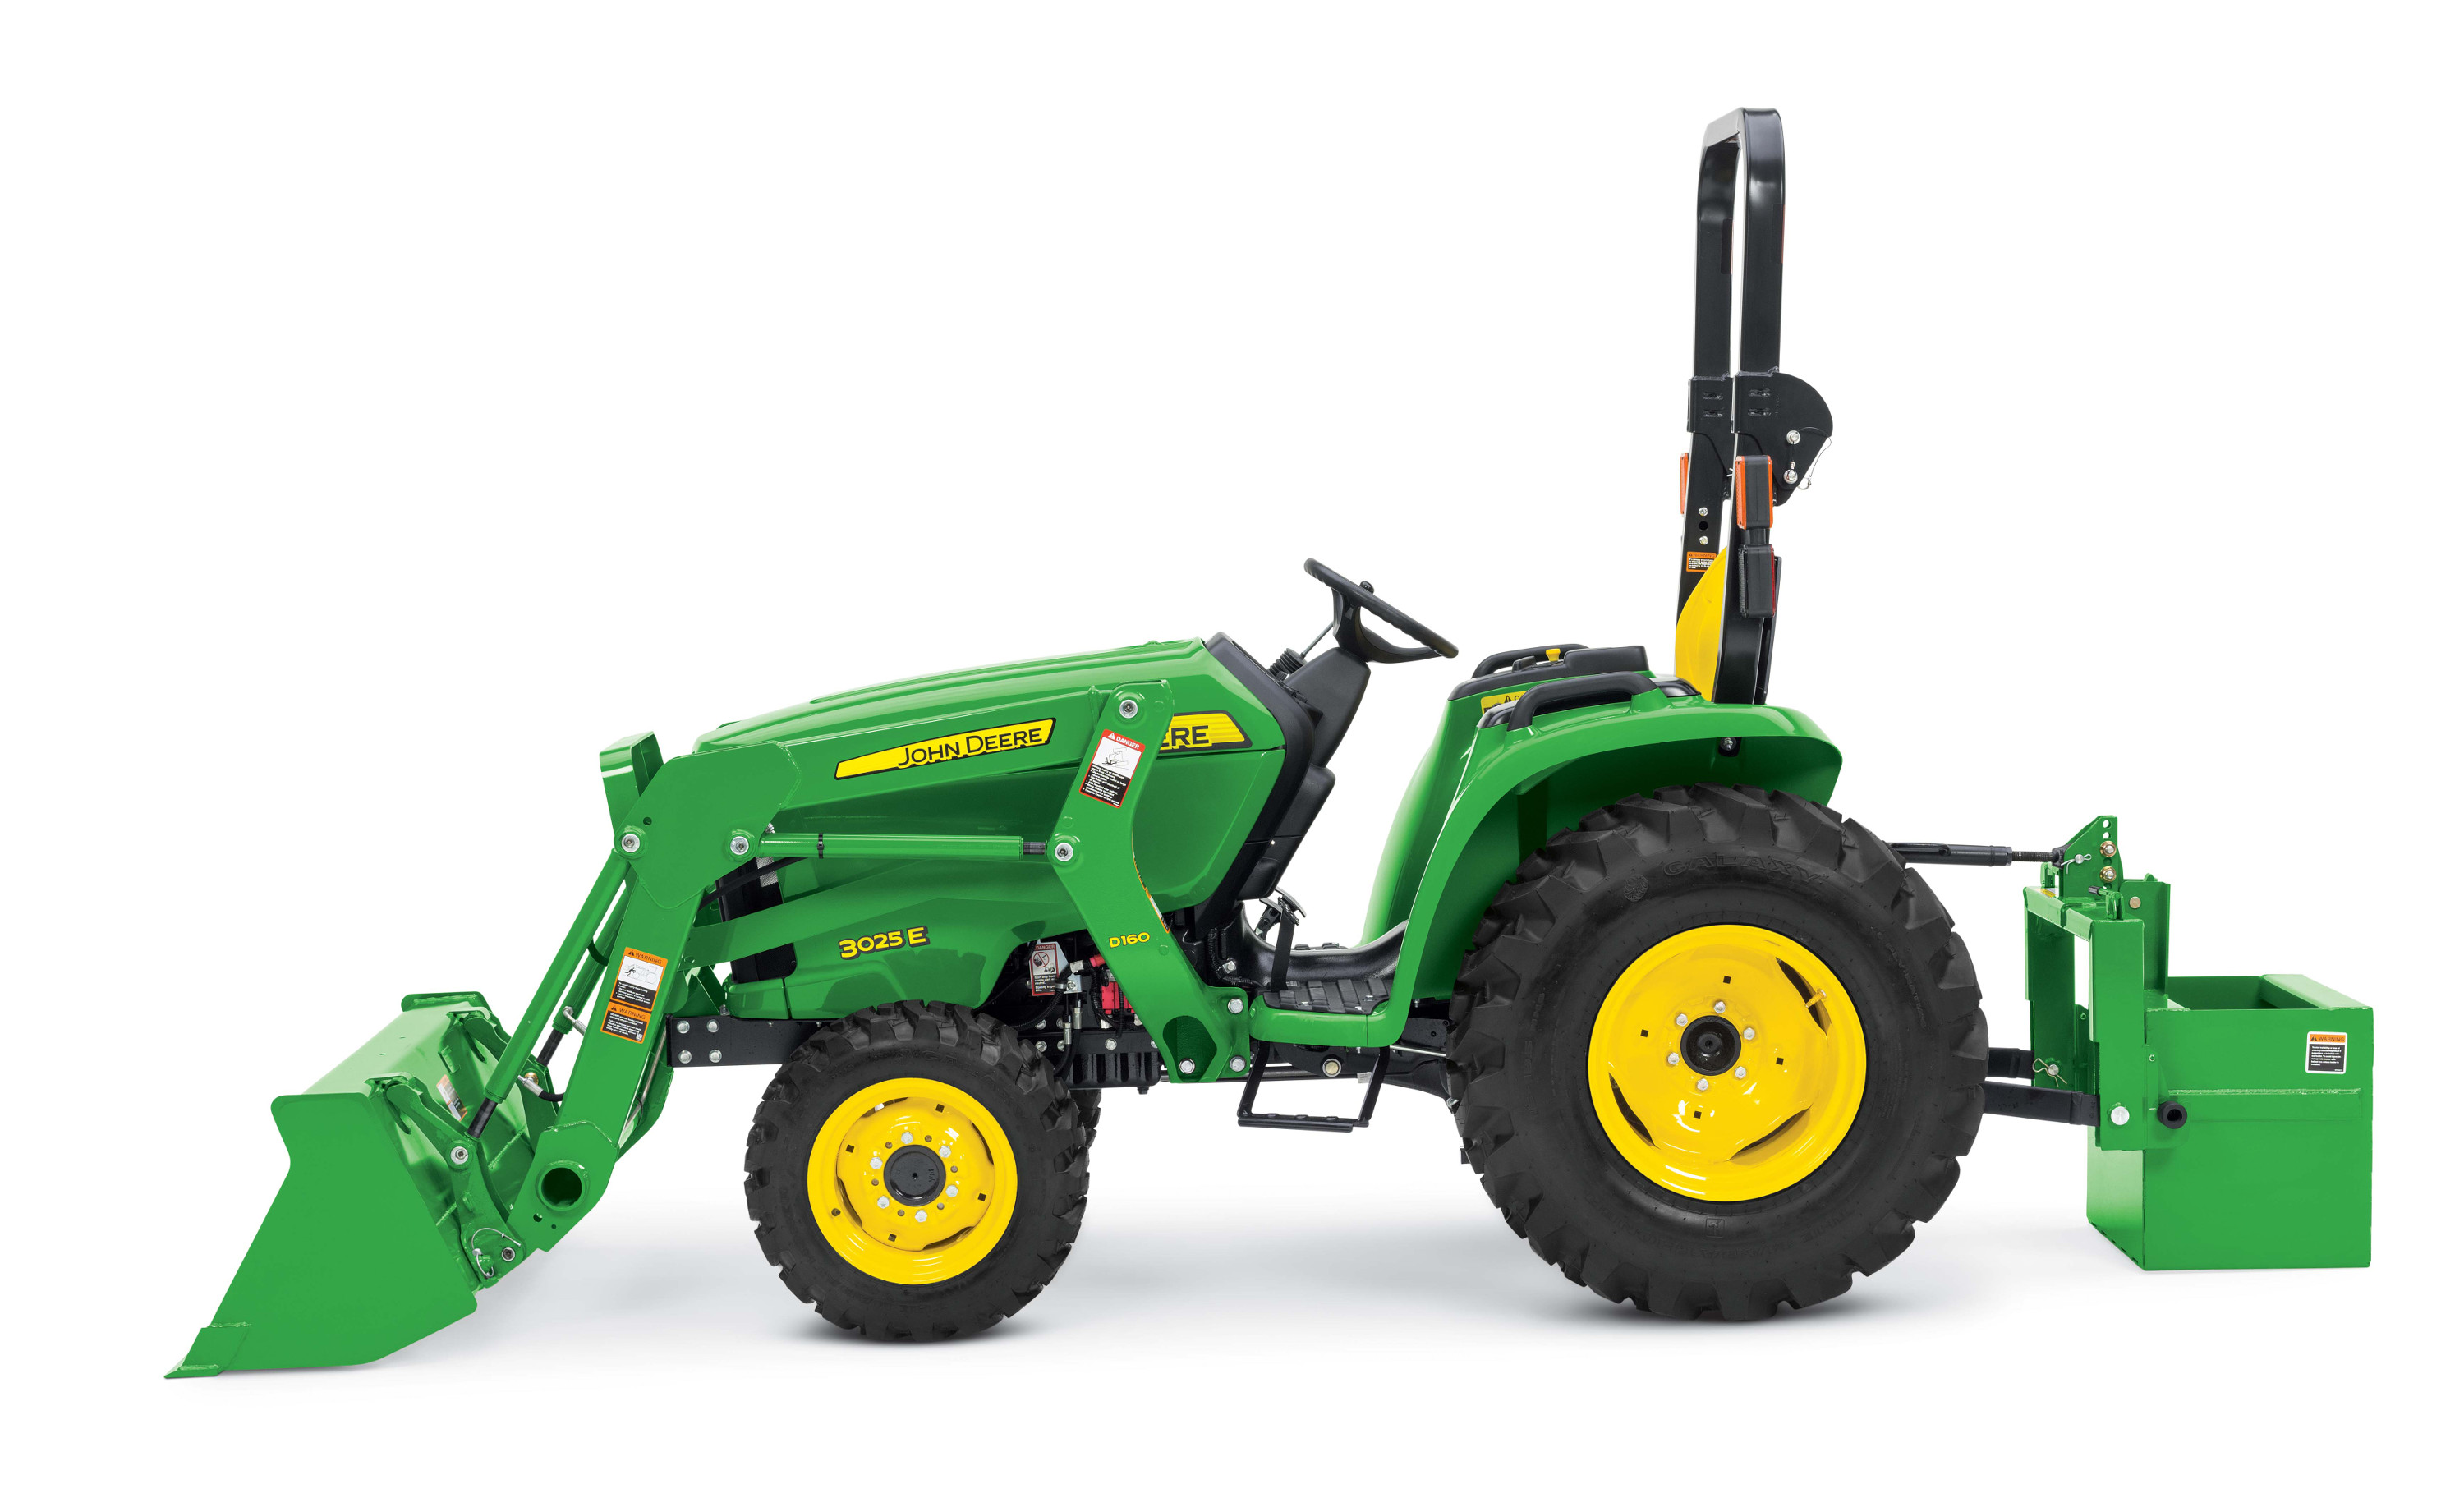 Studio sideview image of a John Deere 3025E compact utility tractor